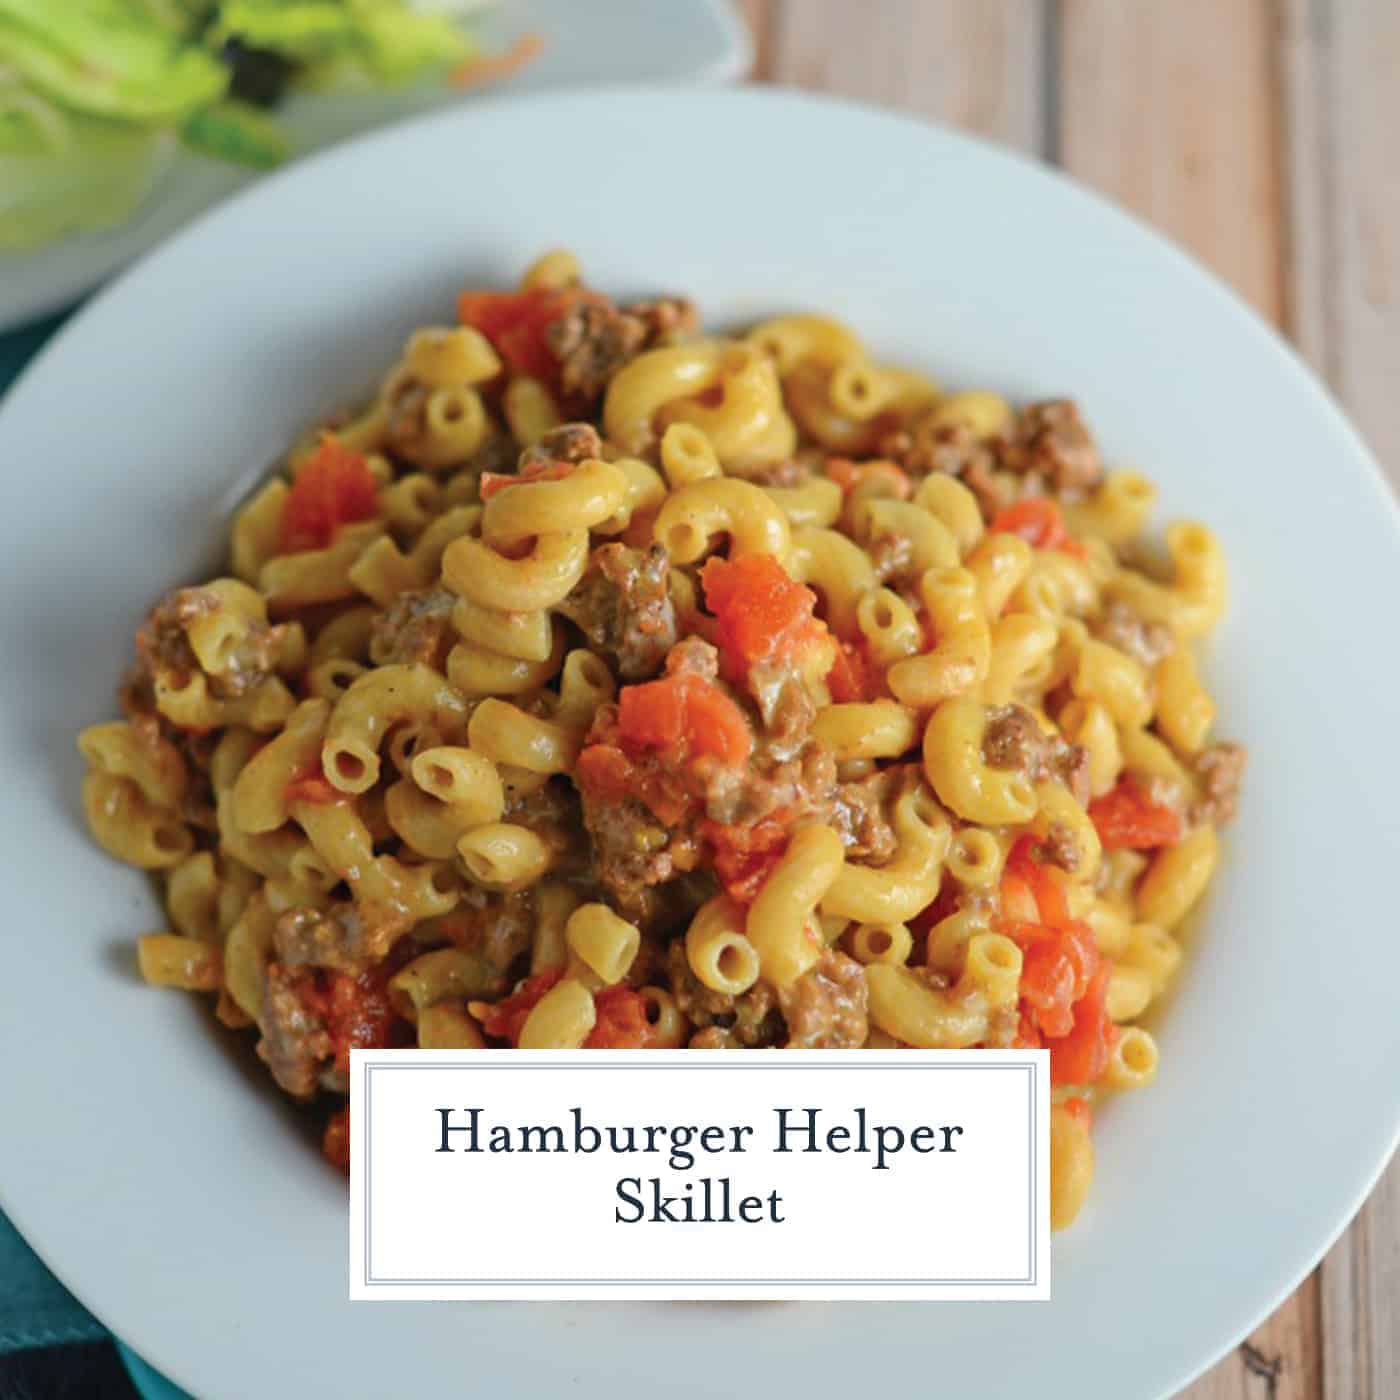 Homemade Hamburger Helper Skillet is a  great ground beef recipe with cheddar cheese, seasonings and tomatoes all ready in 20-minutes! #hamburgerhelper #onedishmeal #castironskilletrecipes #groundbeefrecipes www.savoryexperiments.com 